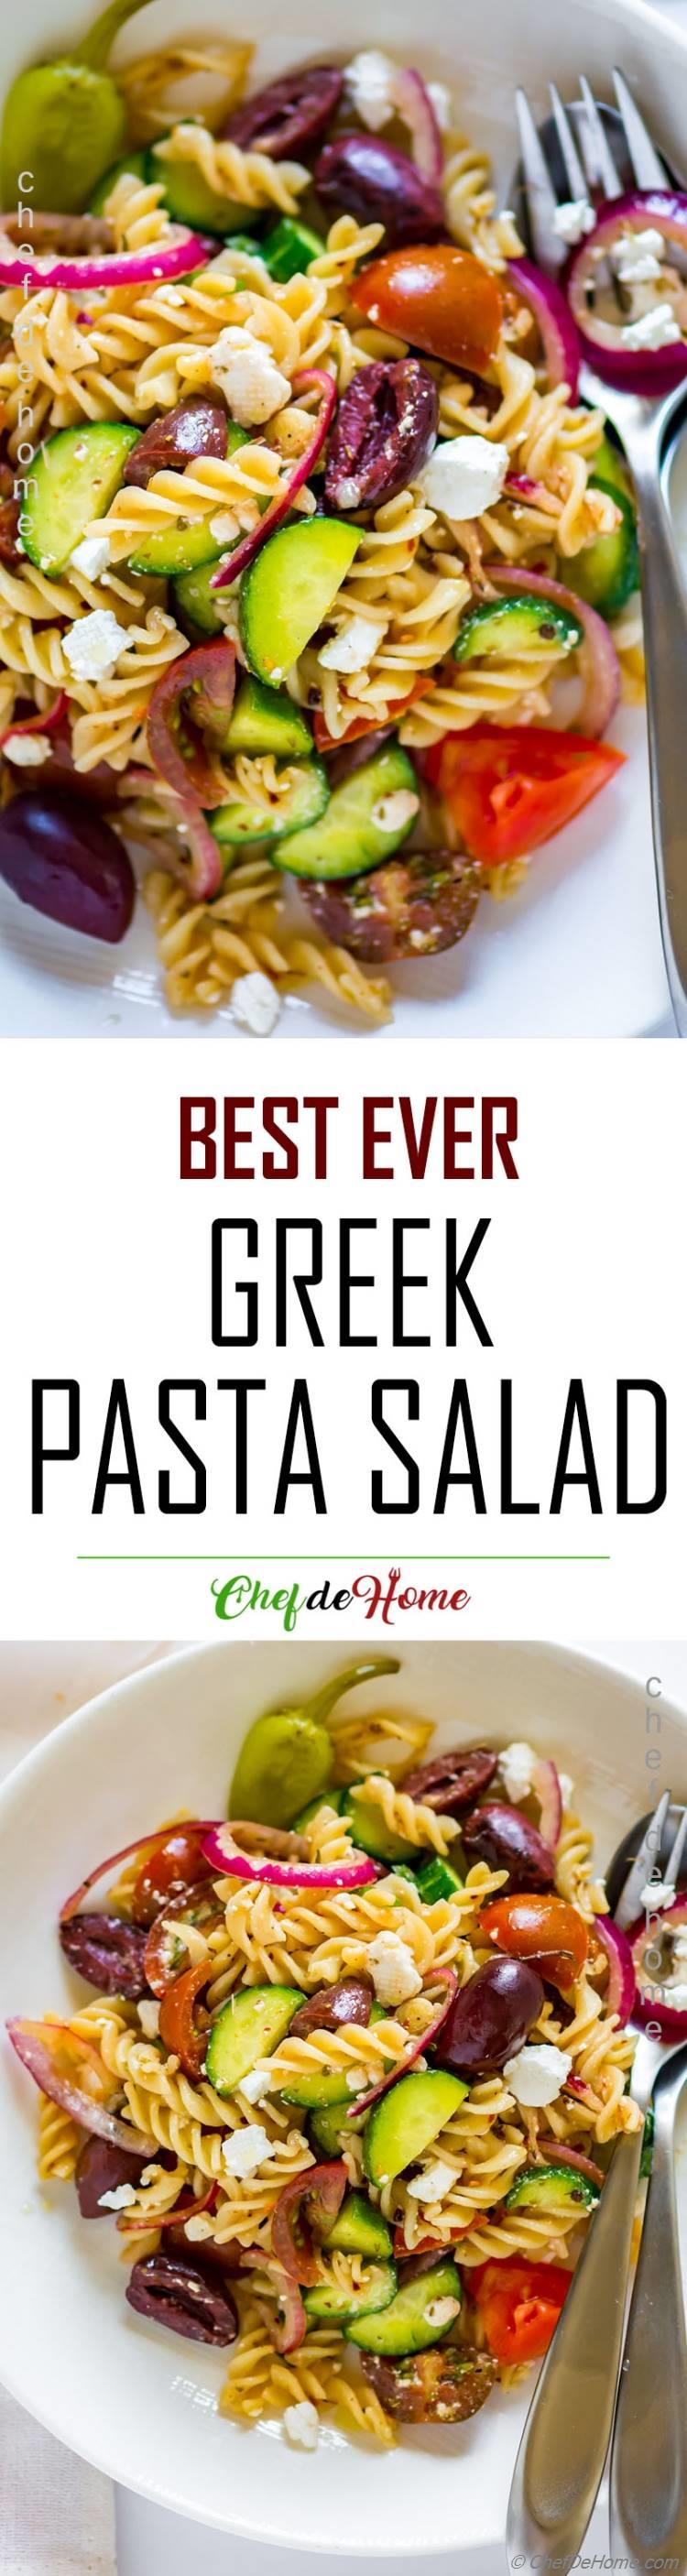 The best easy and delicious Greek Pasta Salad with feta cheese